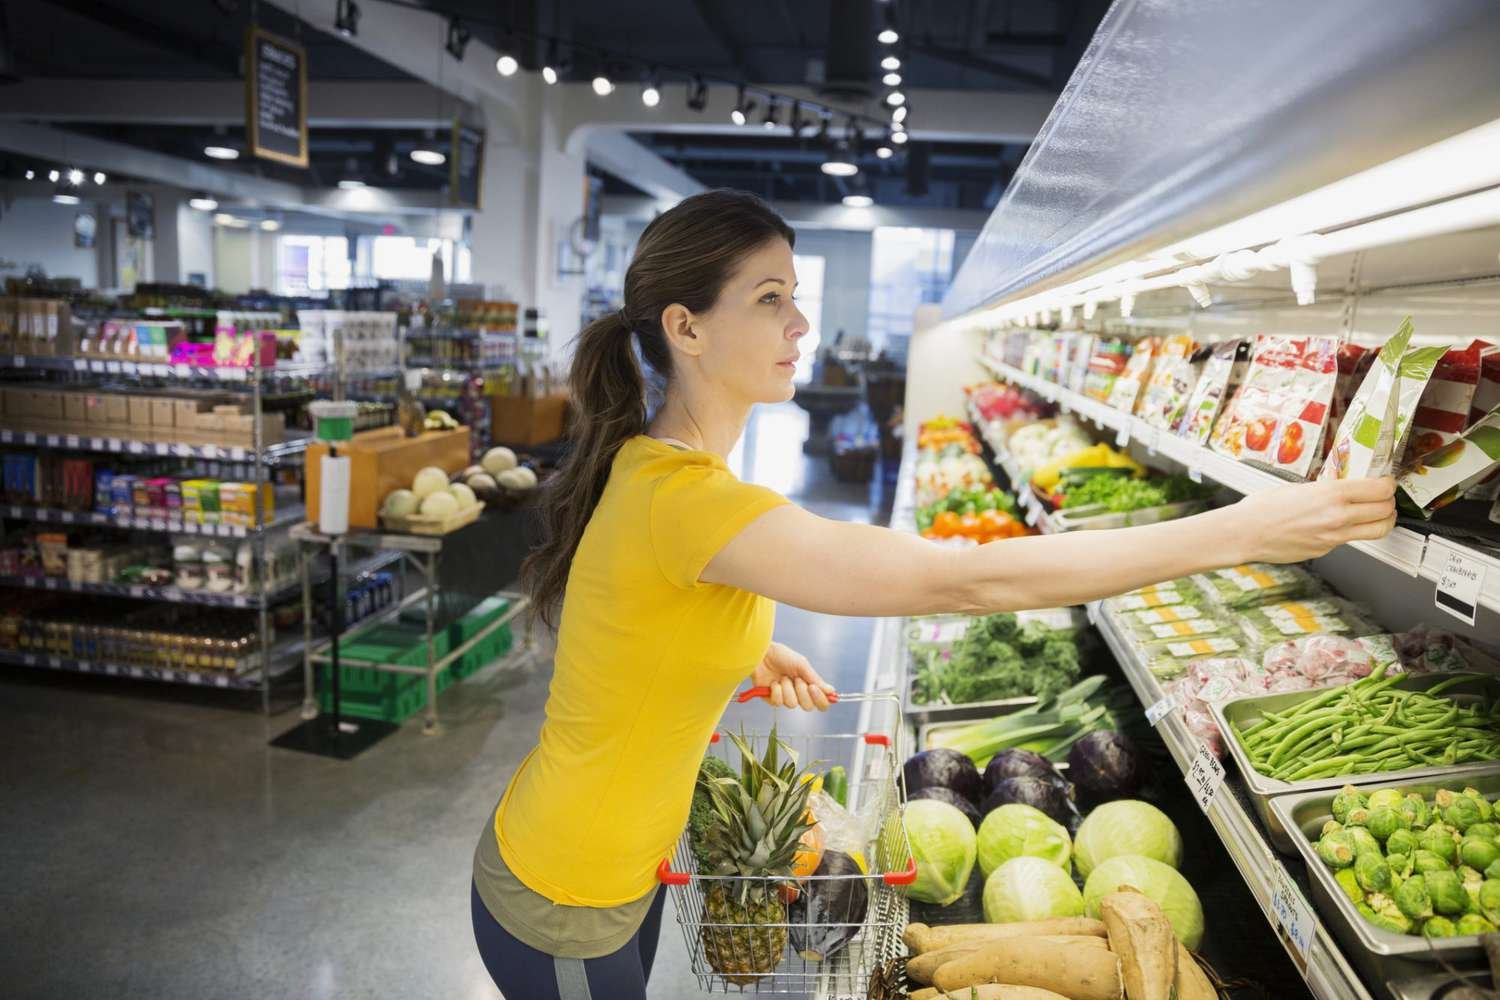 5 Things You Shouldn't Do in the Produce Section at the Grocery Store (and 5 You Should)